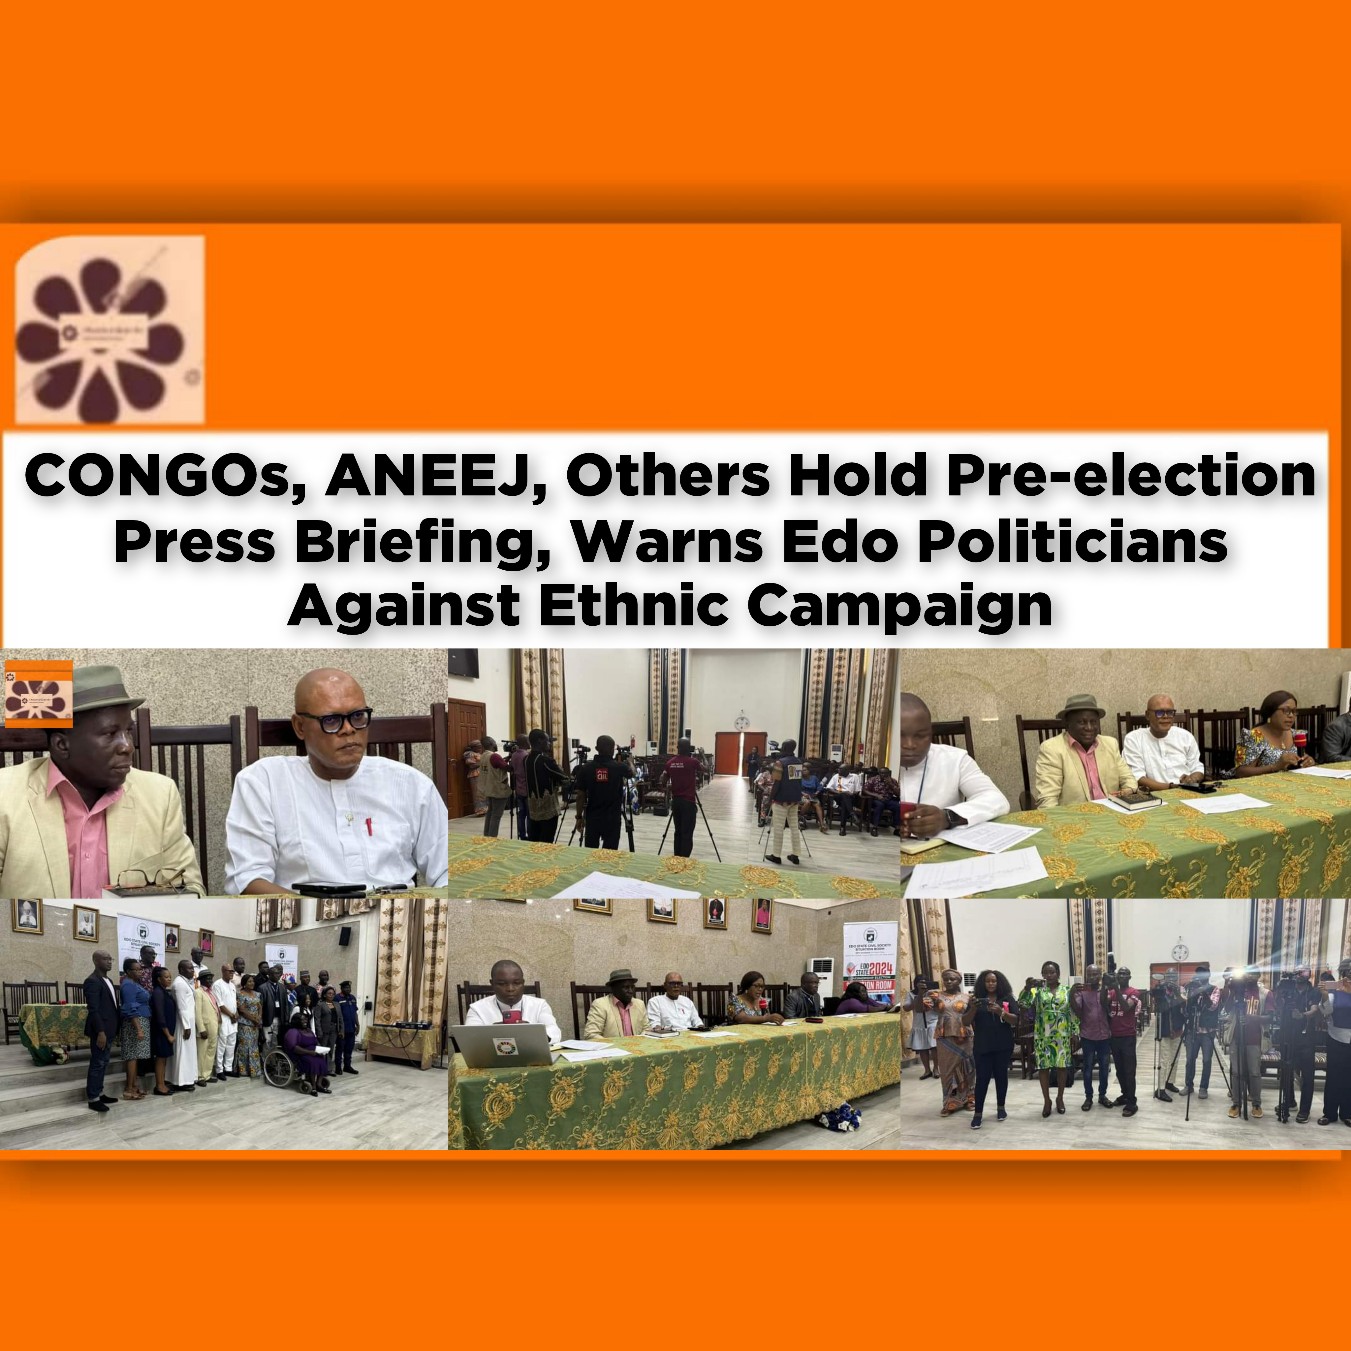 CONGOs, ANEEJ, Others Hold Pre-election Press Briefing, Warns Edo Politicians Against Ethnic Campaign ~ OsazuwaAkonedo #Islamabad